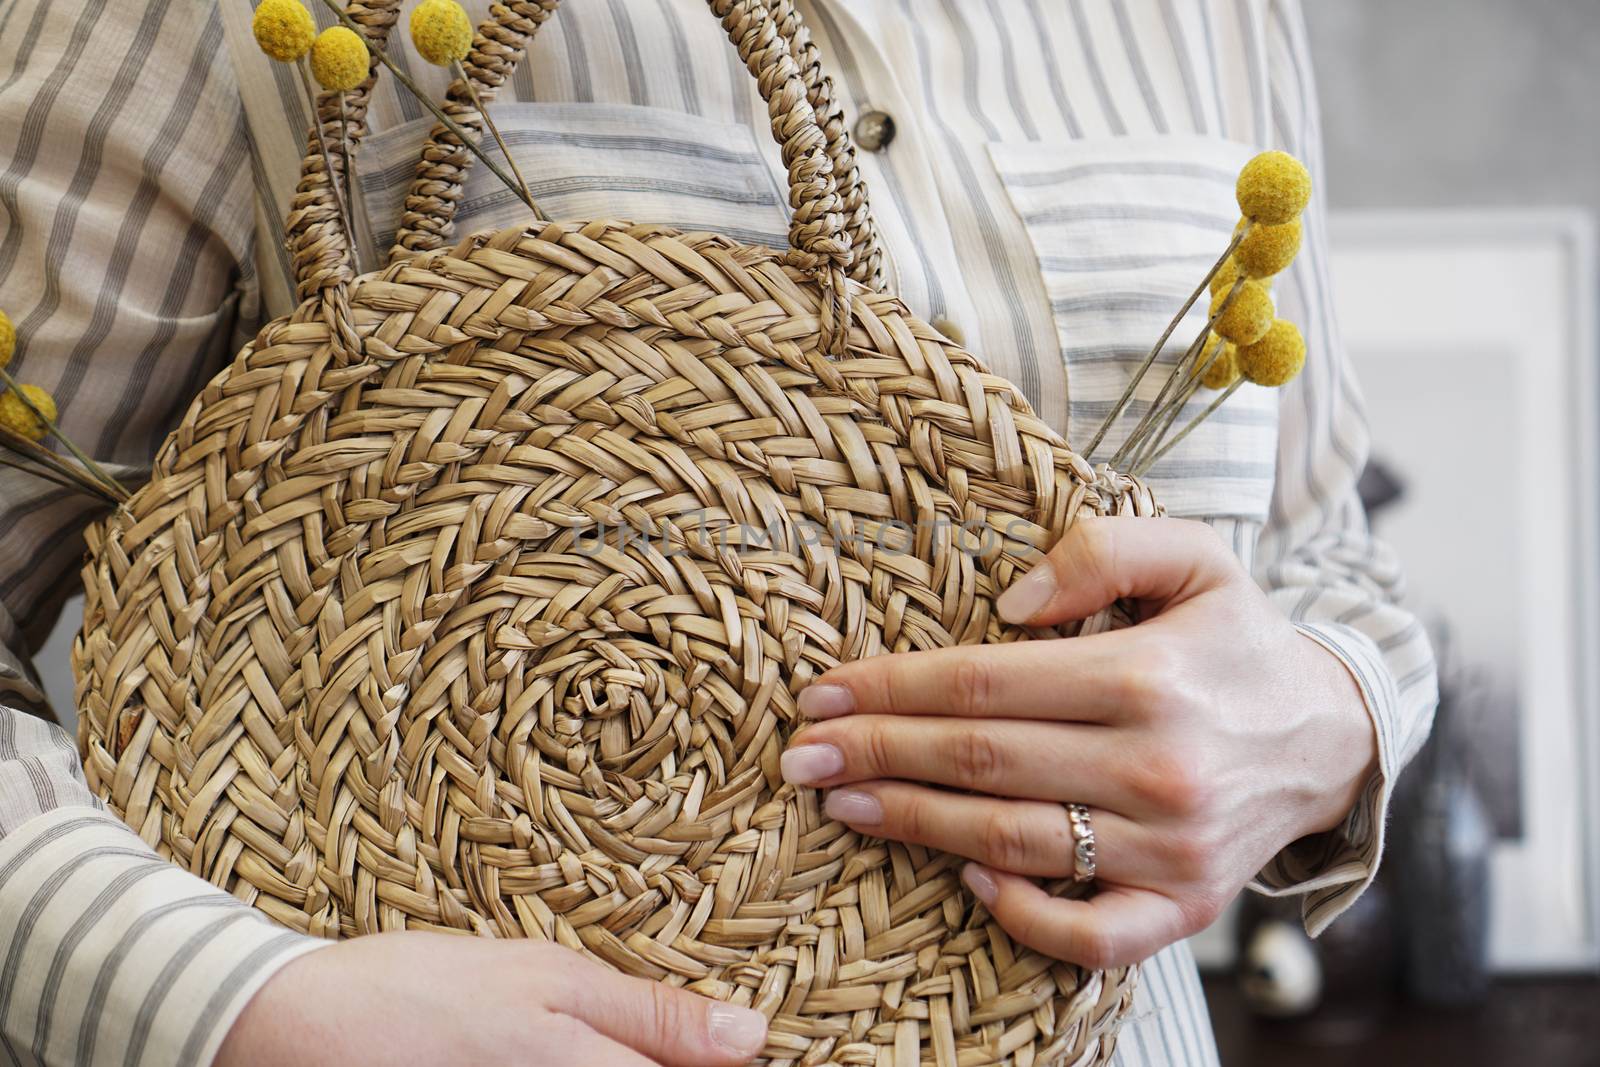 Woman hands with fashionable stylish nude rattan bag and straw bag by natali_brill